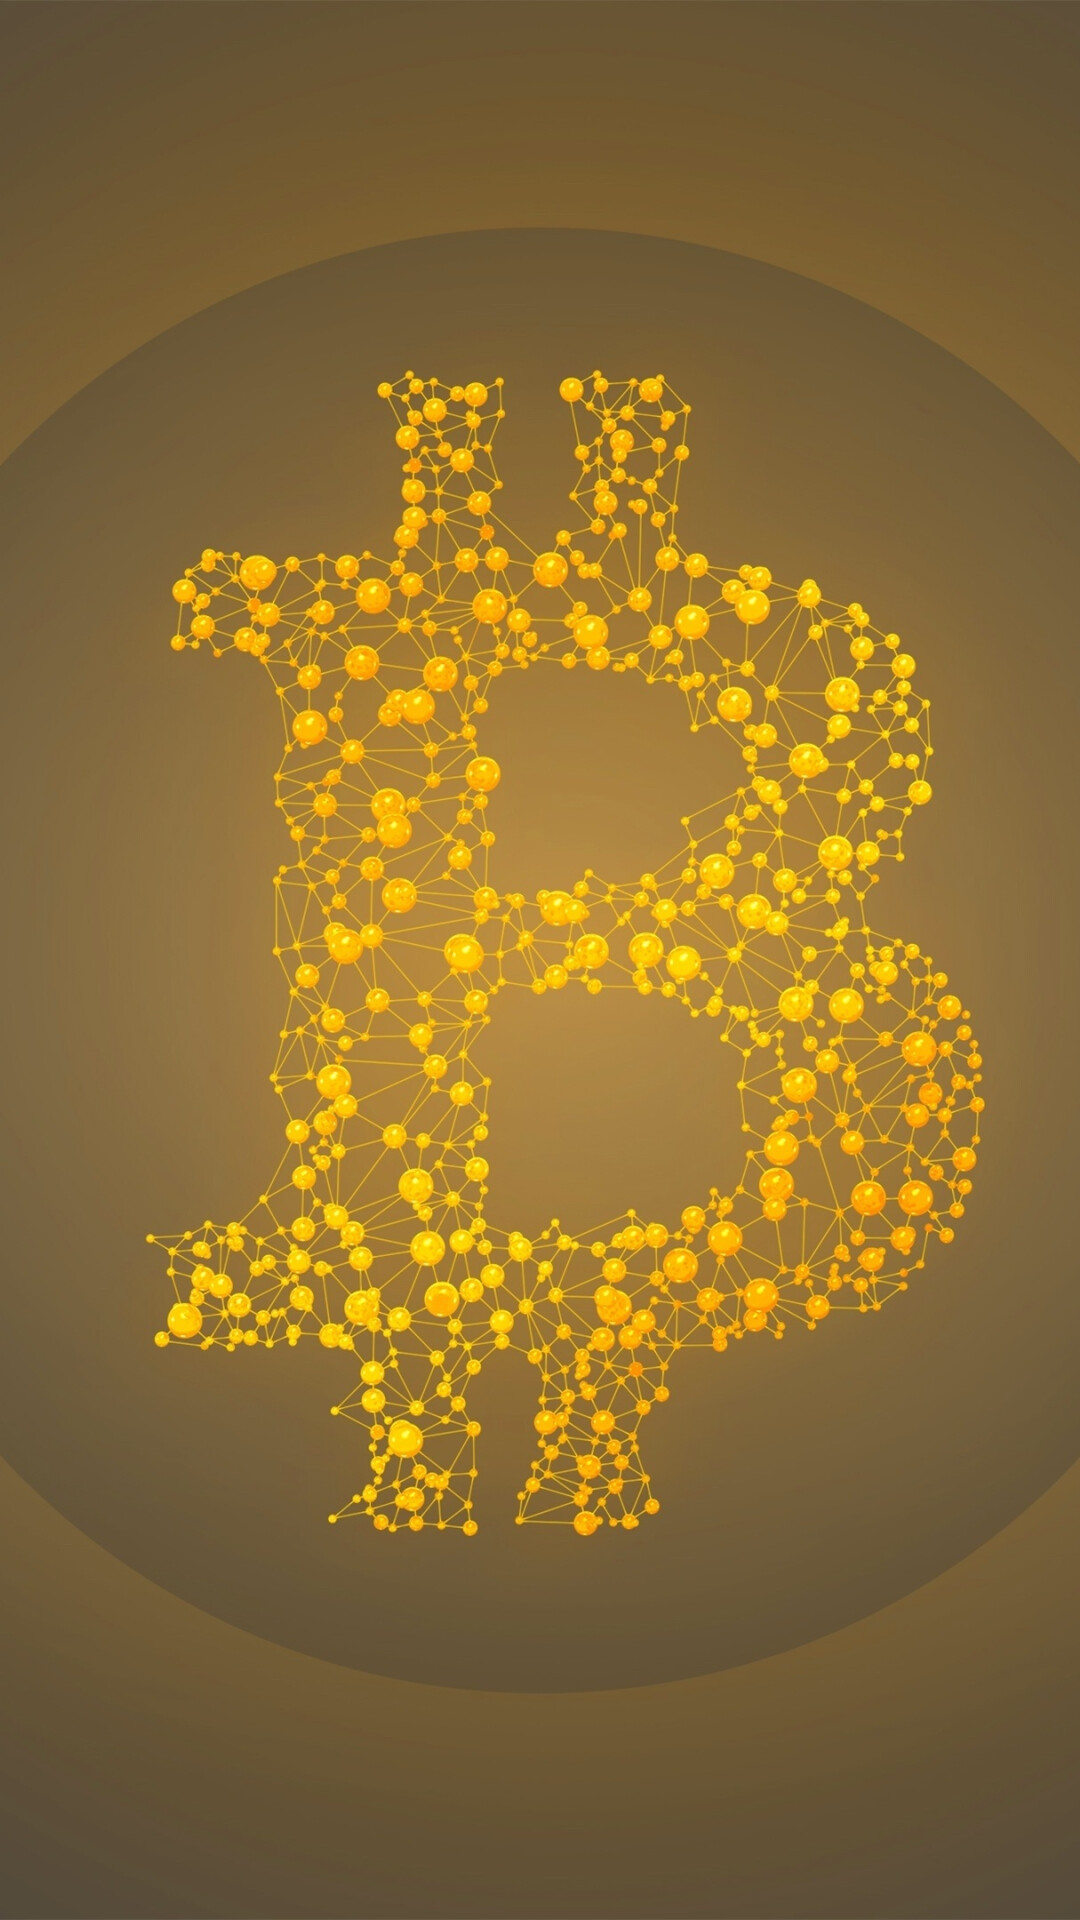 Bitcoin: A new currency, Created in 2009 by an unknown person using the alias Satoshi Nakamoto. 1080x1920 Full HD Wallpaper.